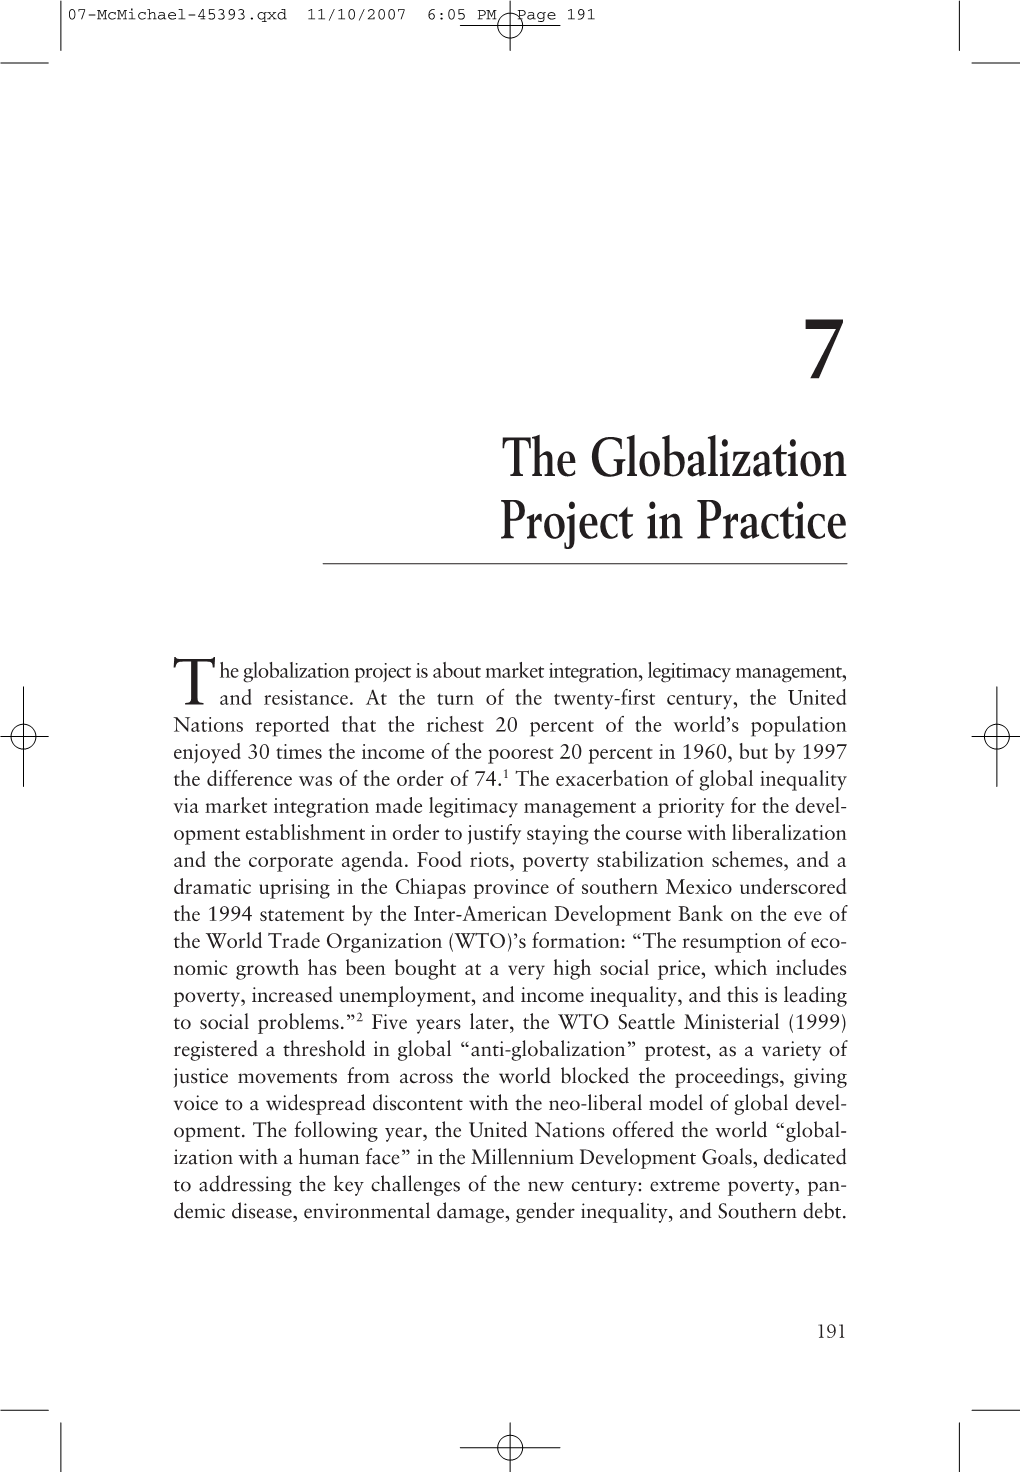 The Globalization Project in Practice